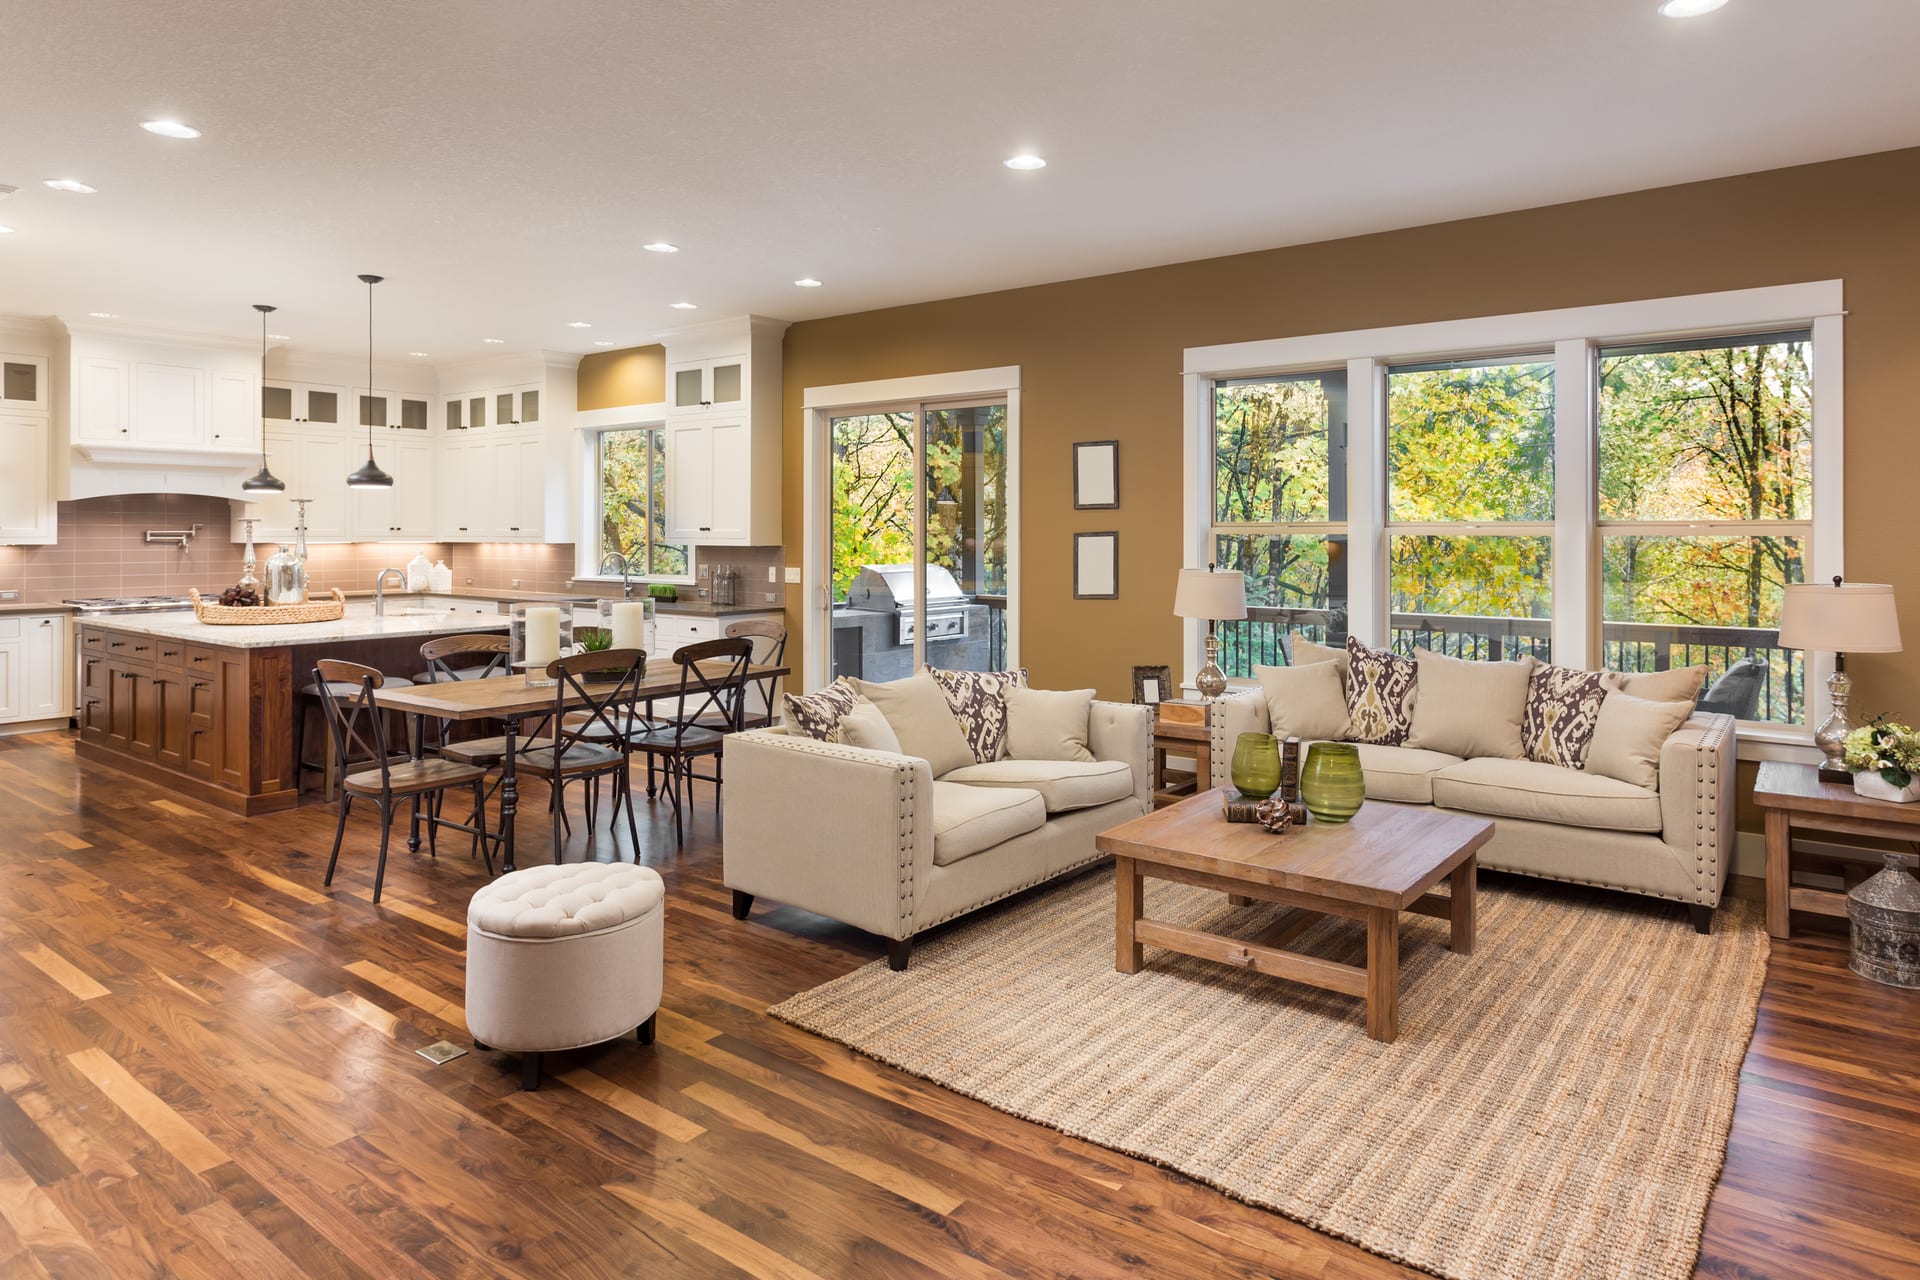 How Much Do Hardwood Floors Increase Home Value?